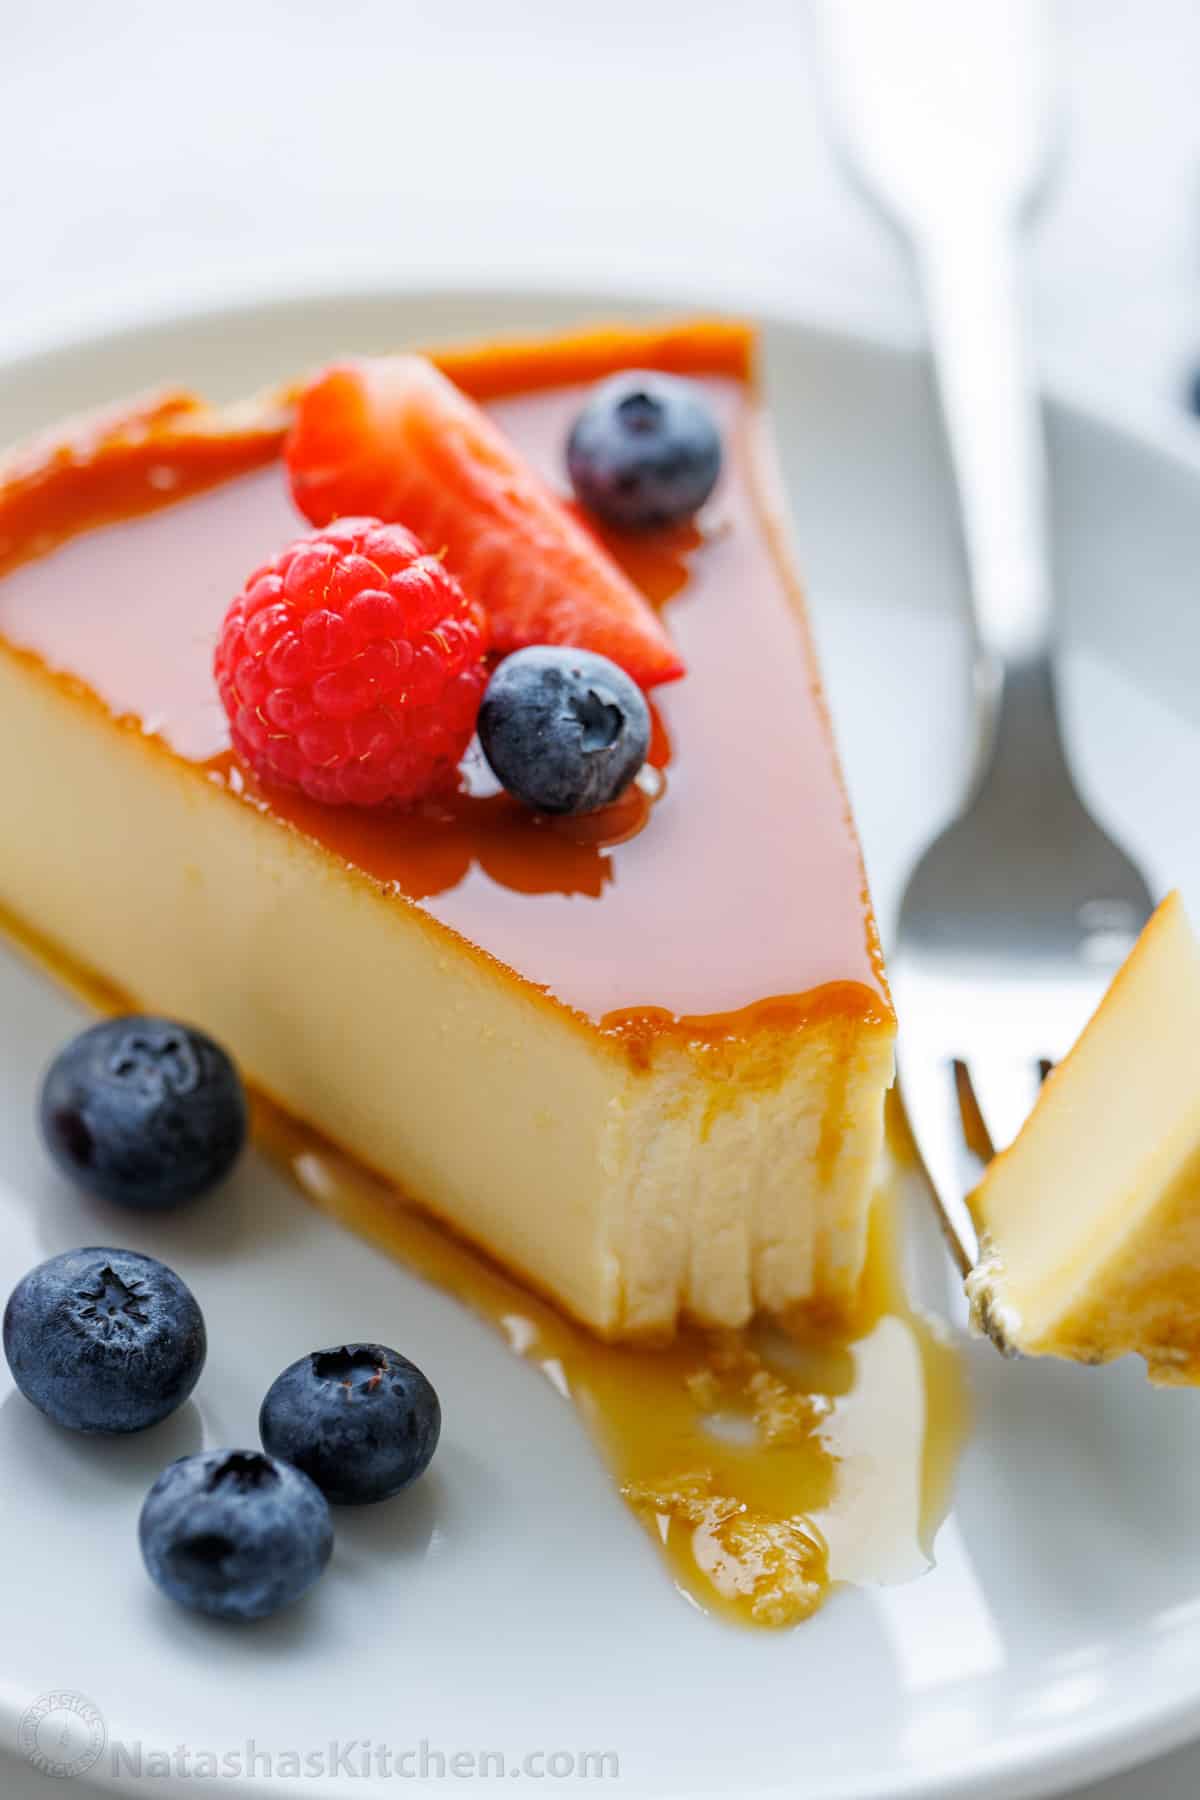 Slice of flan on a plate with a forkful